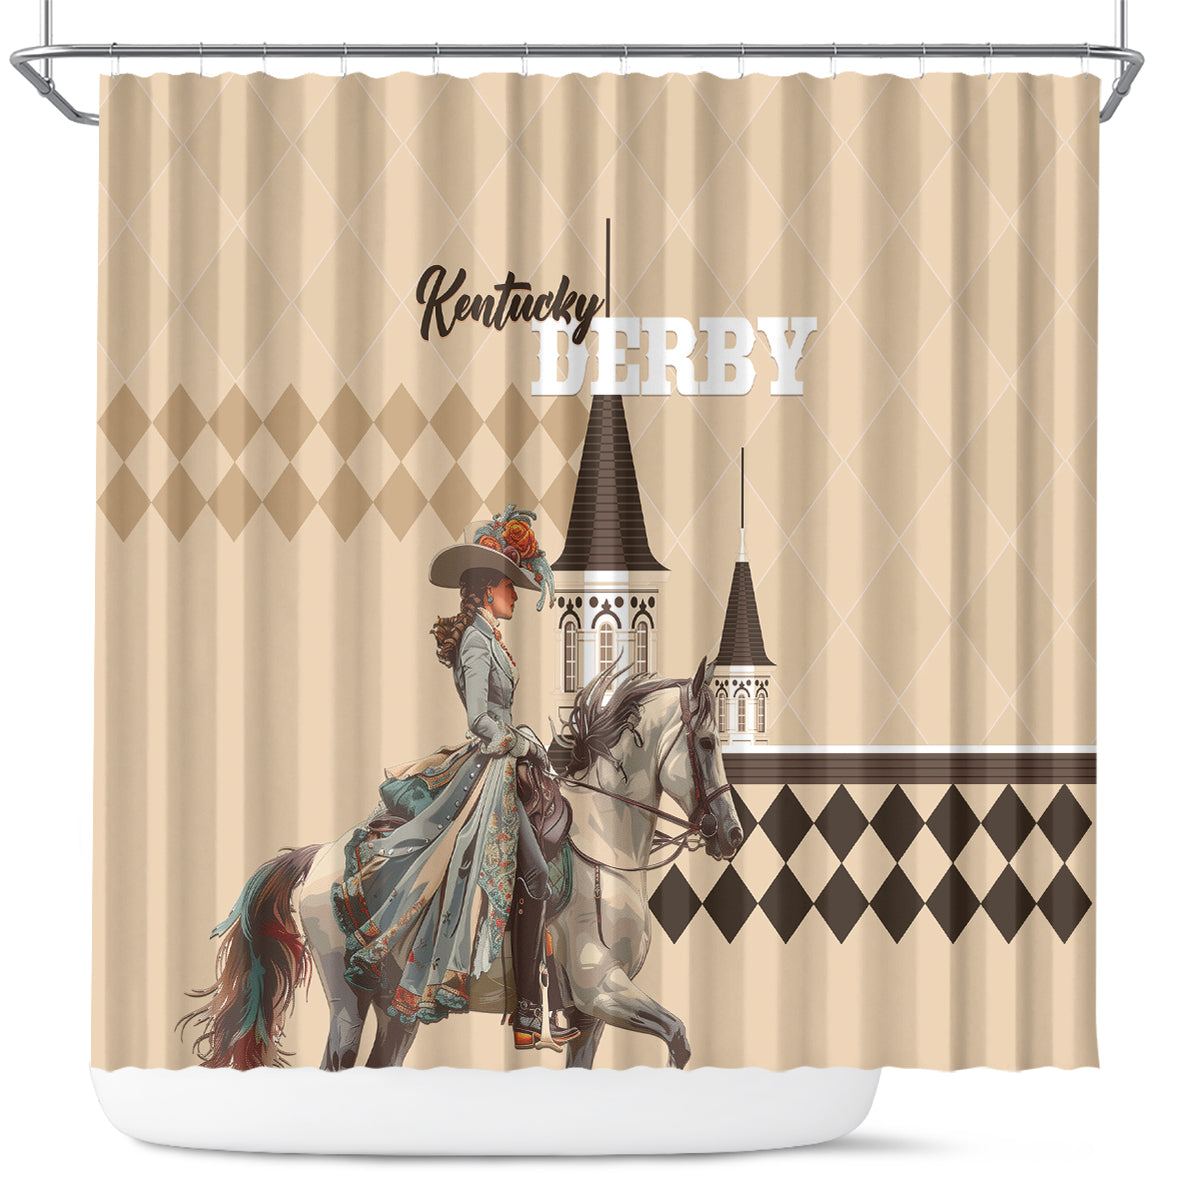 Kentucky Horse Racing Shower Curtain Derby Lady Riding Horse Twin Spires